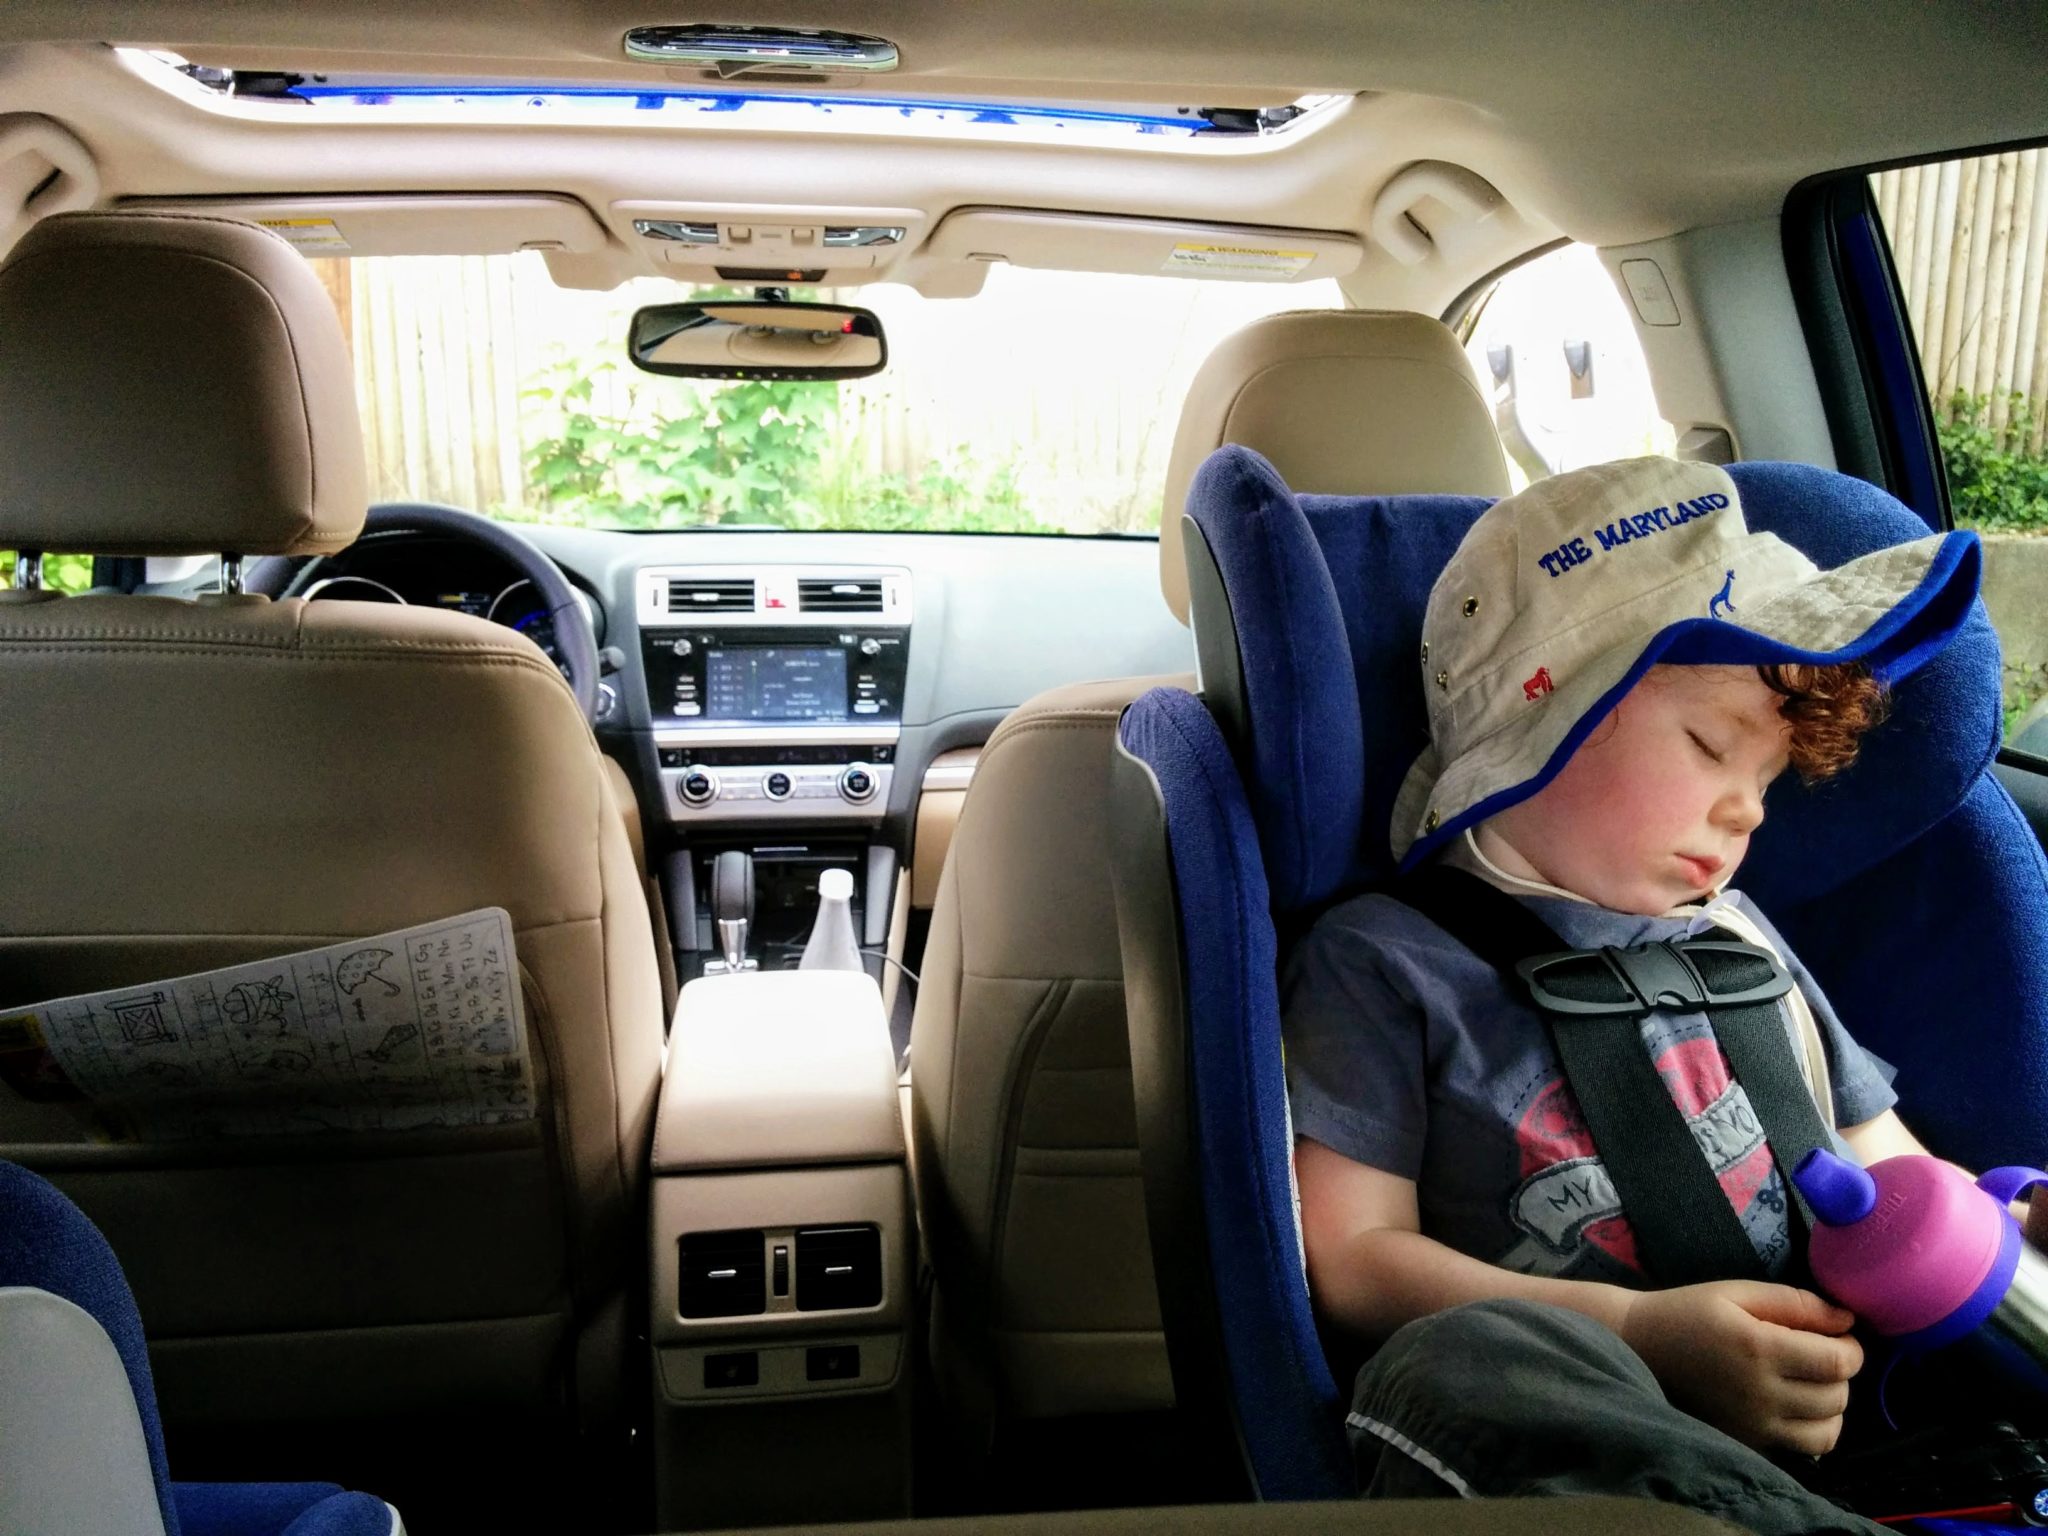 Should Car Seat Straps Go Above or Below the Shoulders? – Buckle